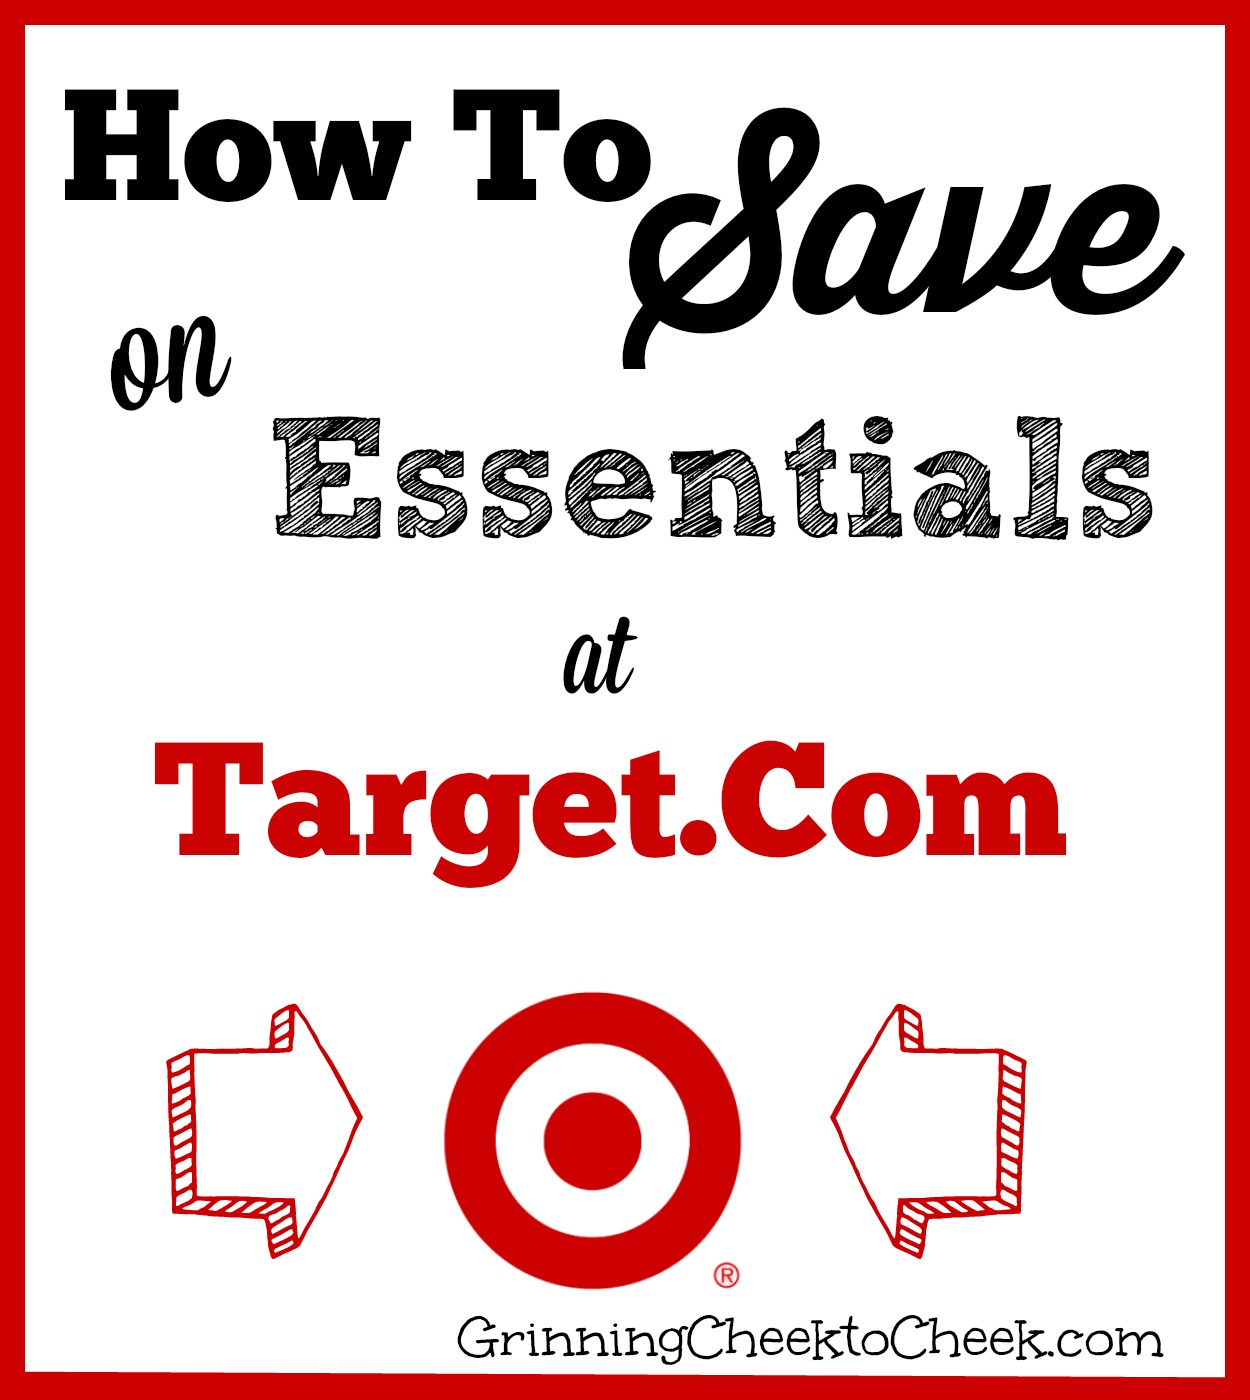 Saving On Essentials at Target.com with Target Subscriptions #TargetSubscriptions